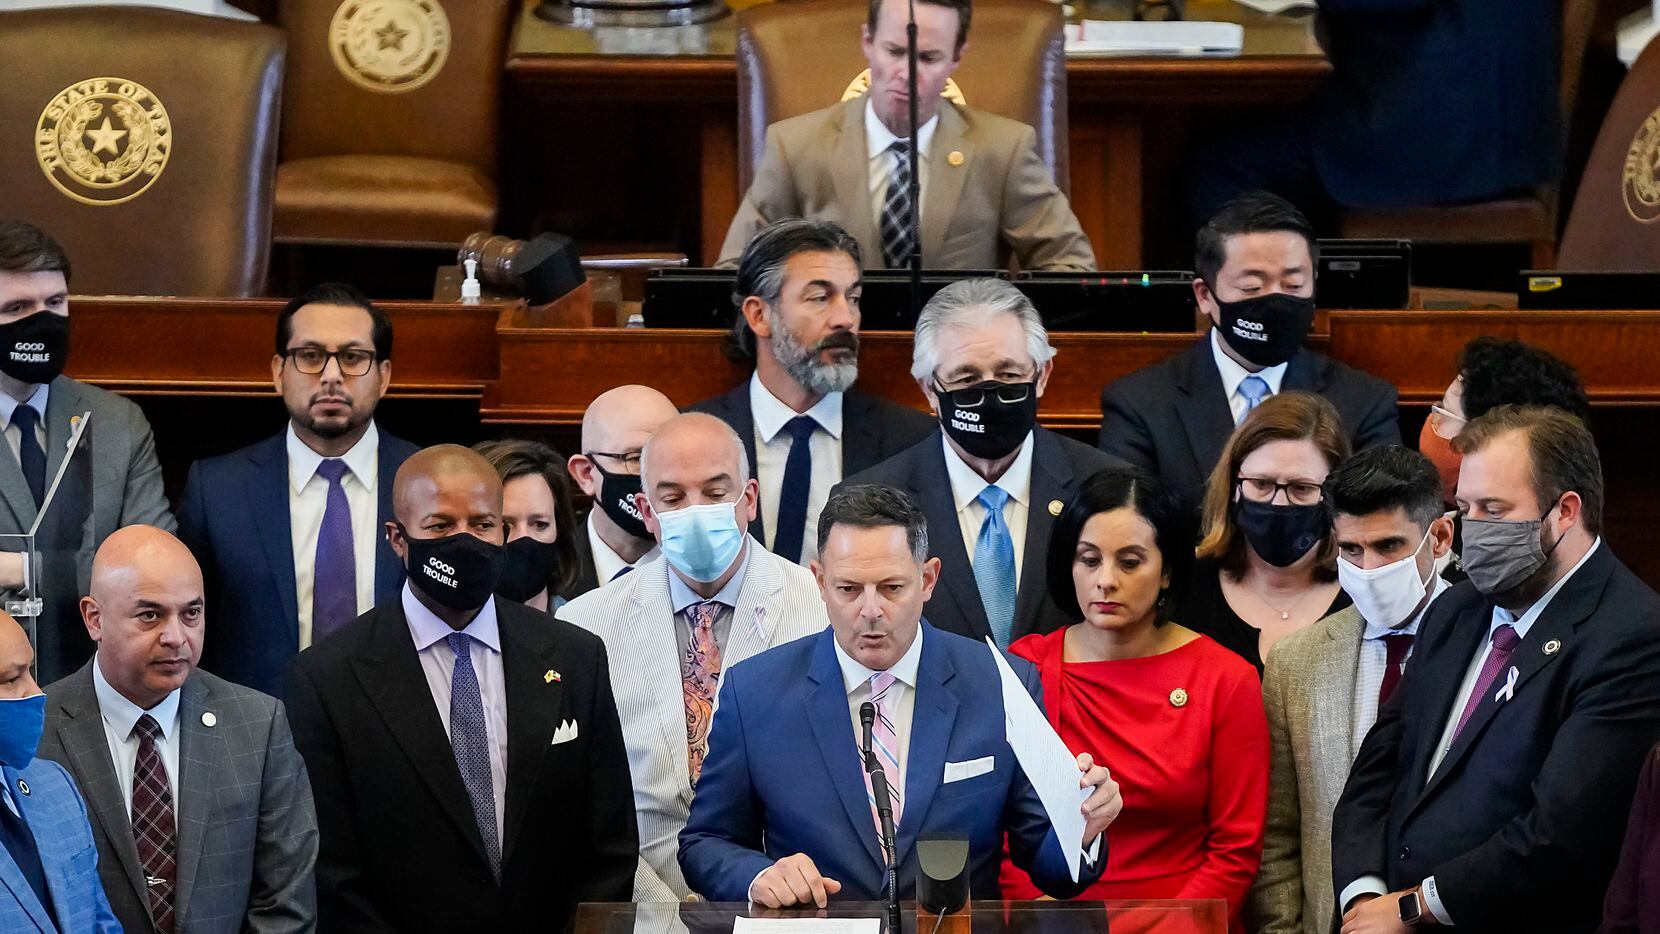 Democrats gathered around Rep. Rafael Anchía, D-Dallas, as he spoke in opposition to SB7 on the floor of the House Chamber at the Texas Capitol during the 87th Texas Legislature on May 7, 2021.